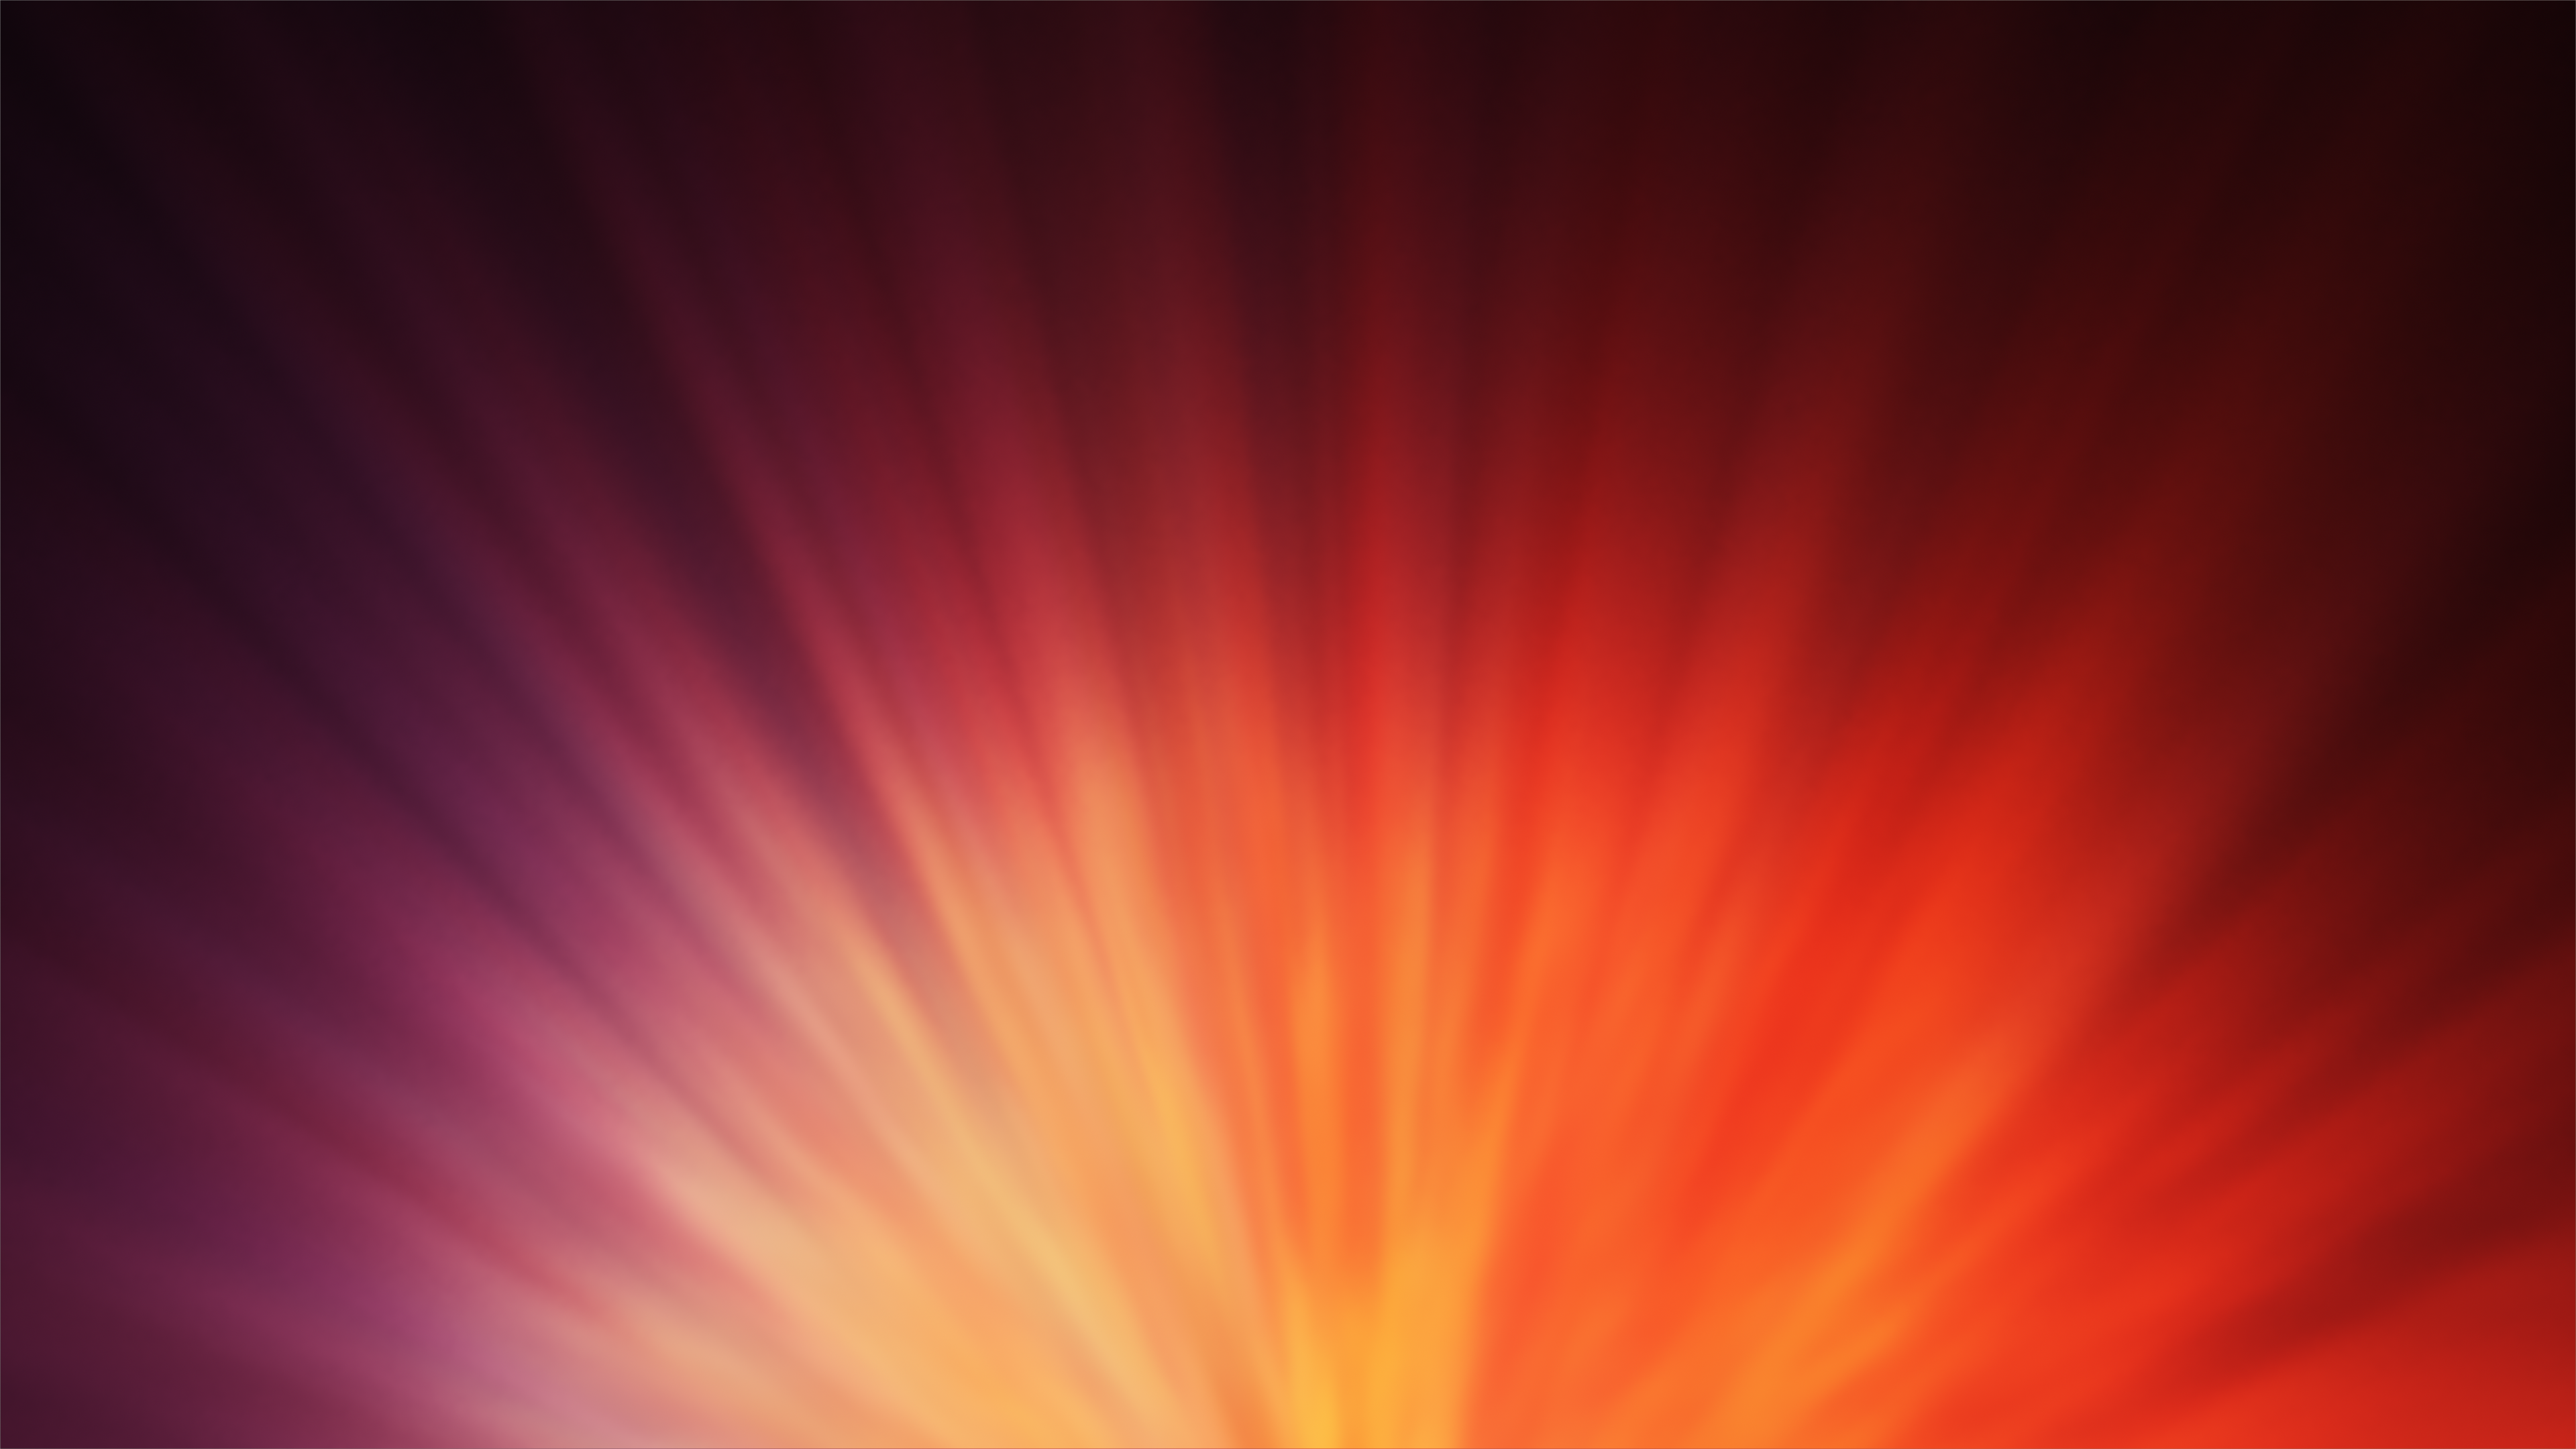 Abstract Sun Wallpapers